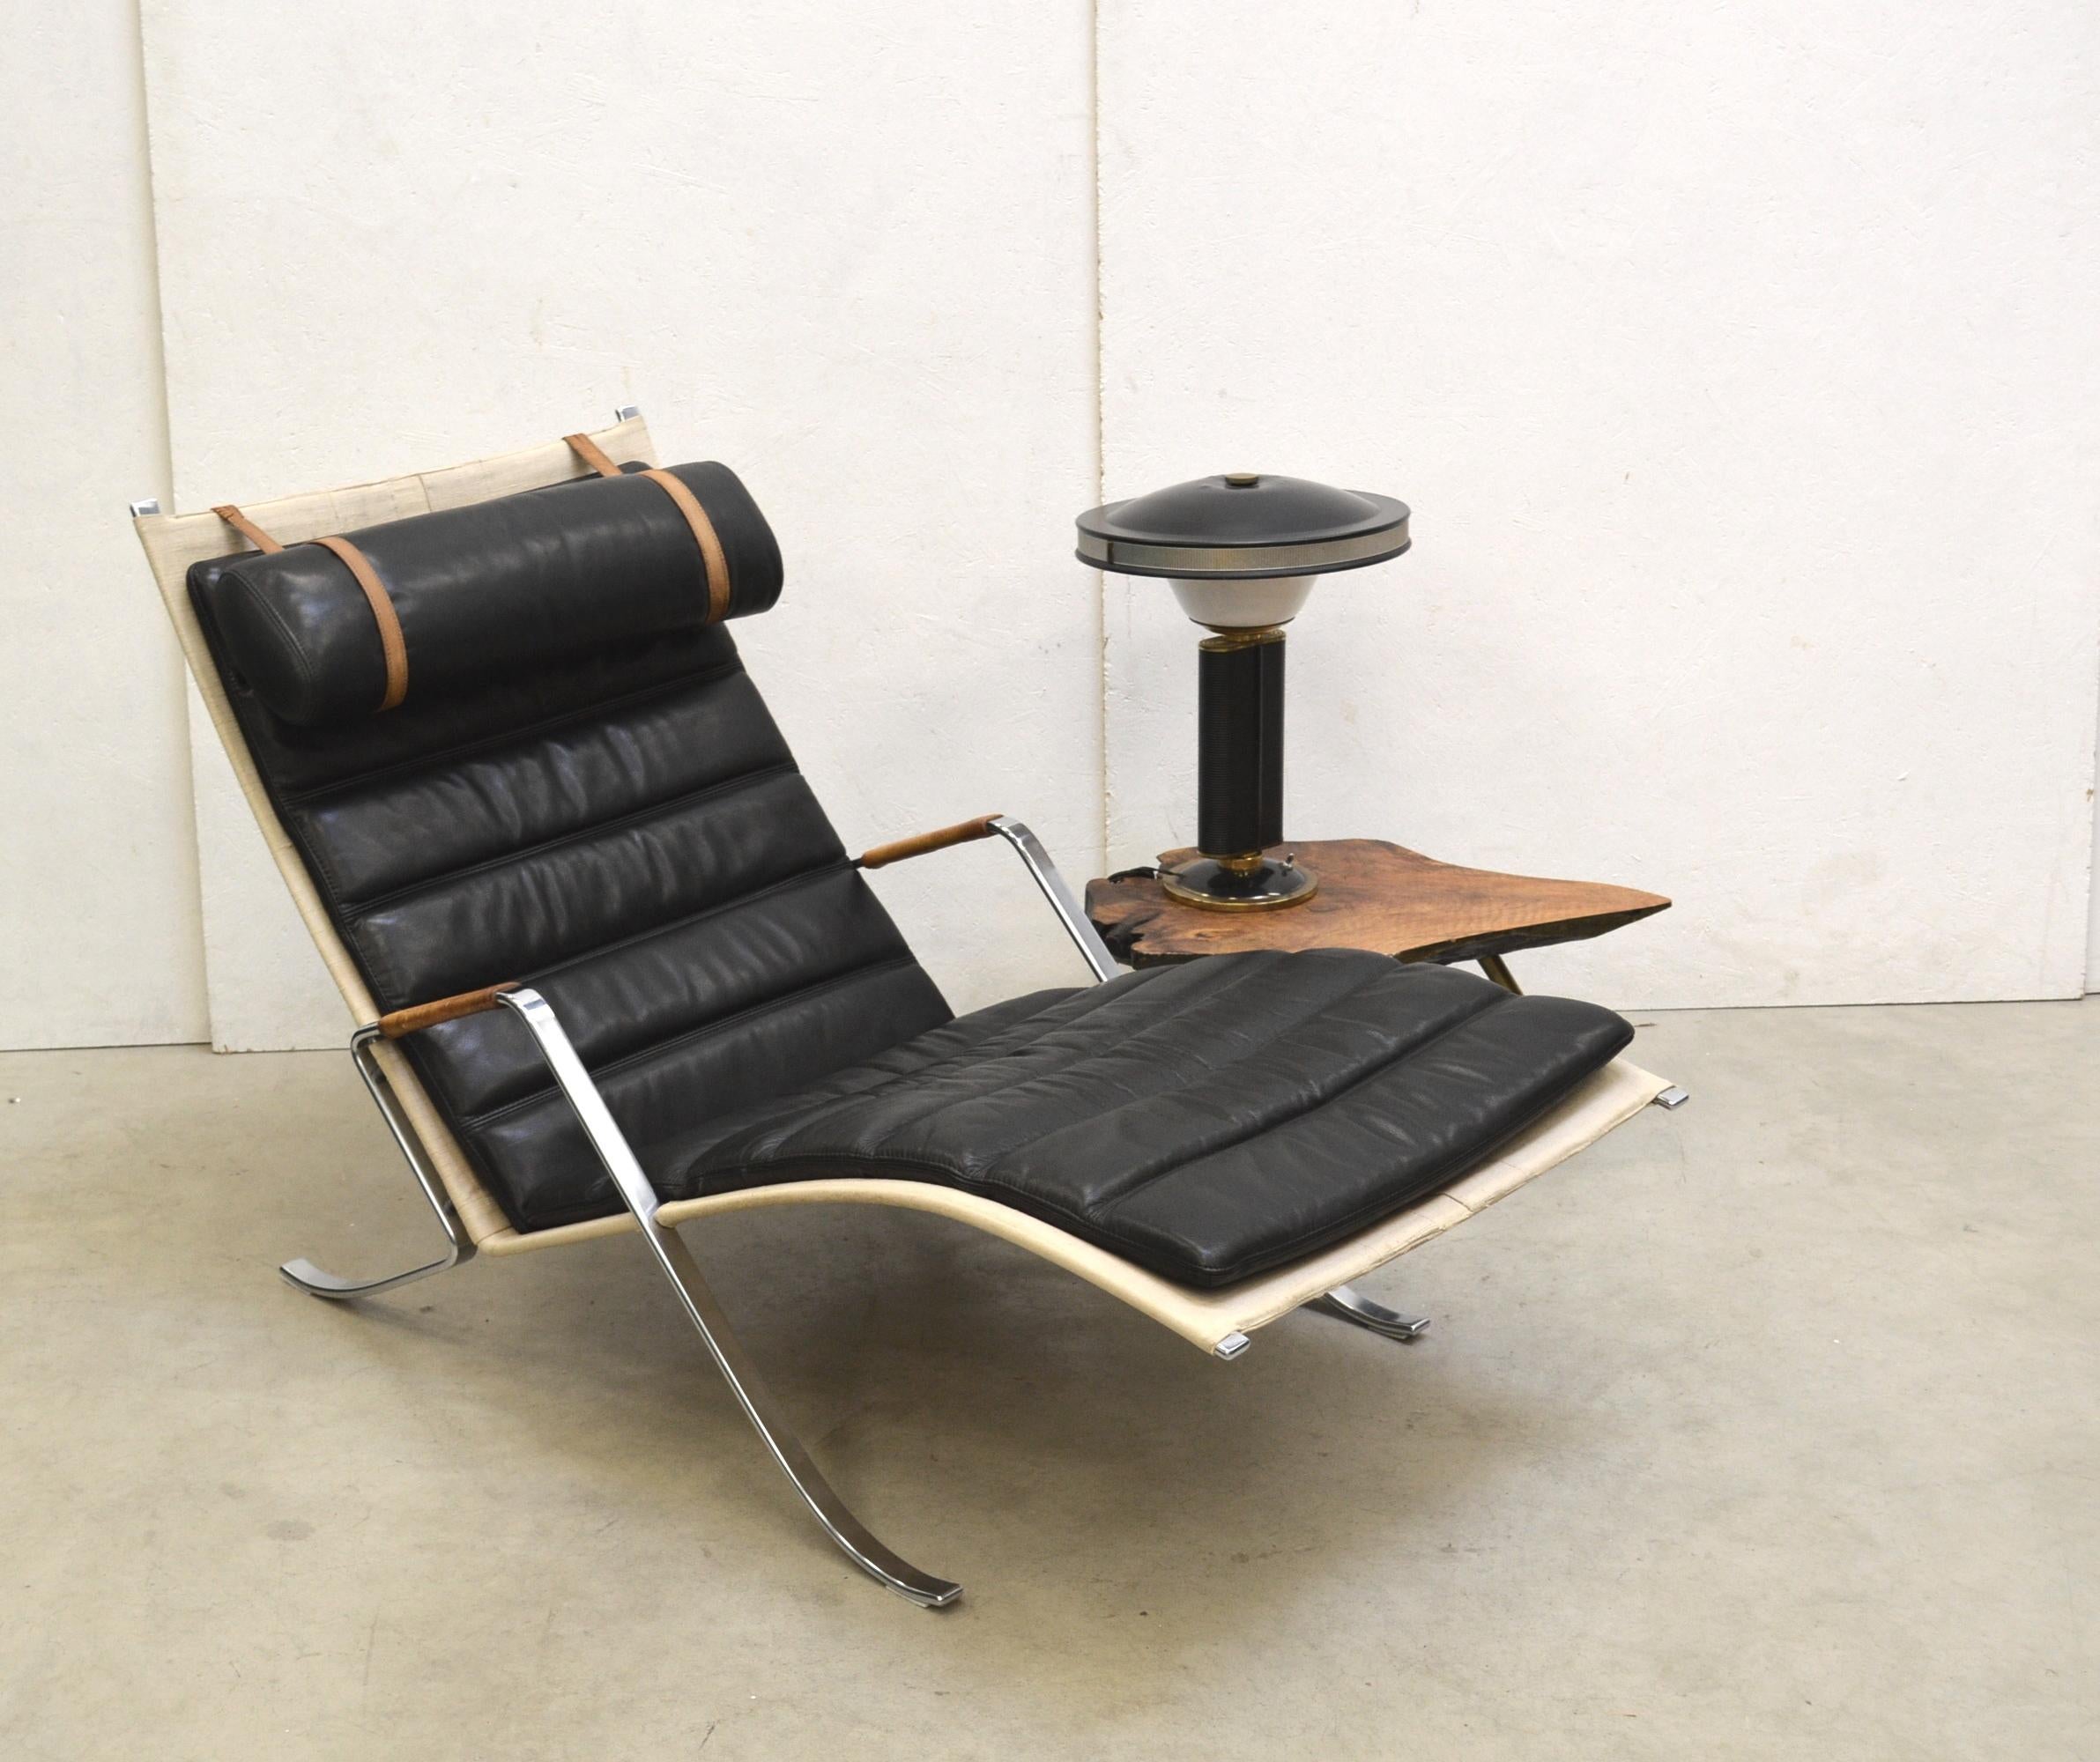 Stainless Steel FK87 Grasshopper Chaise by Fabricius & Kastholm for Kill International, 1960s